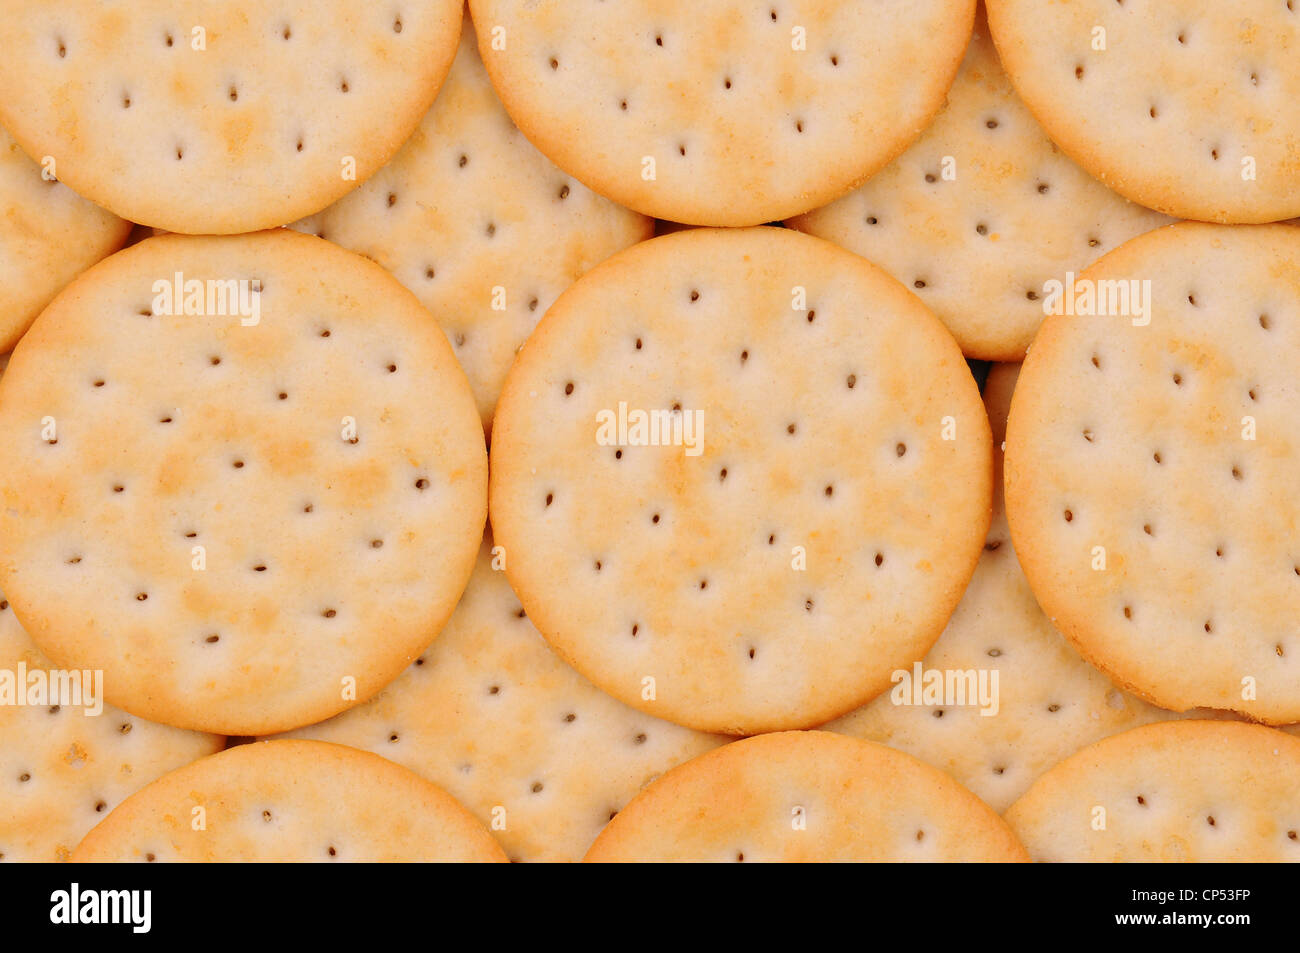 Group of snack crackers lined up in a row. Stock Photo